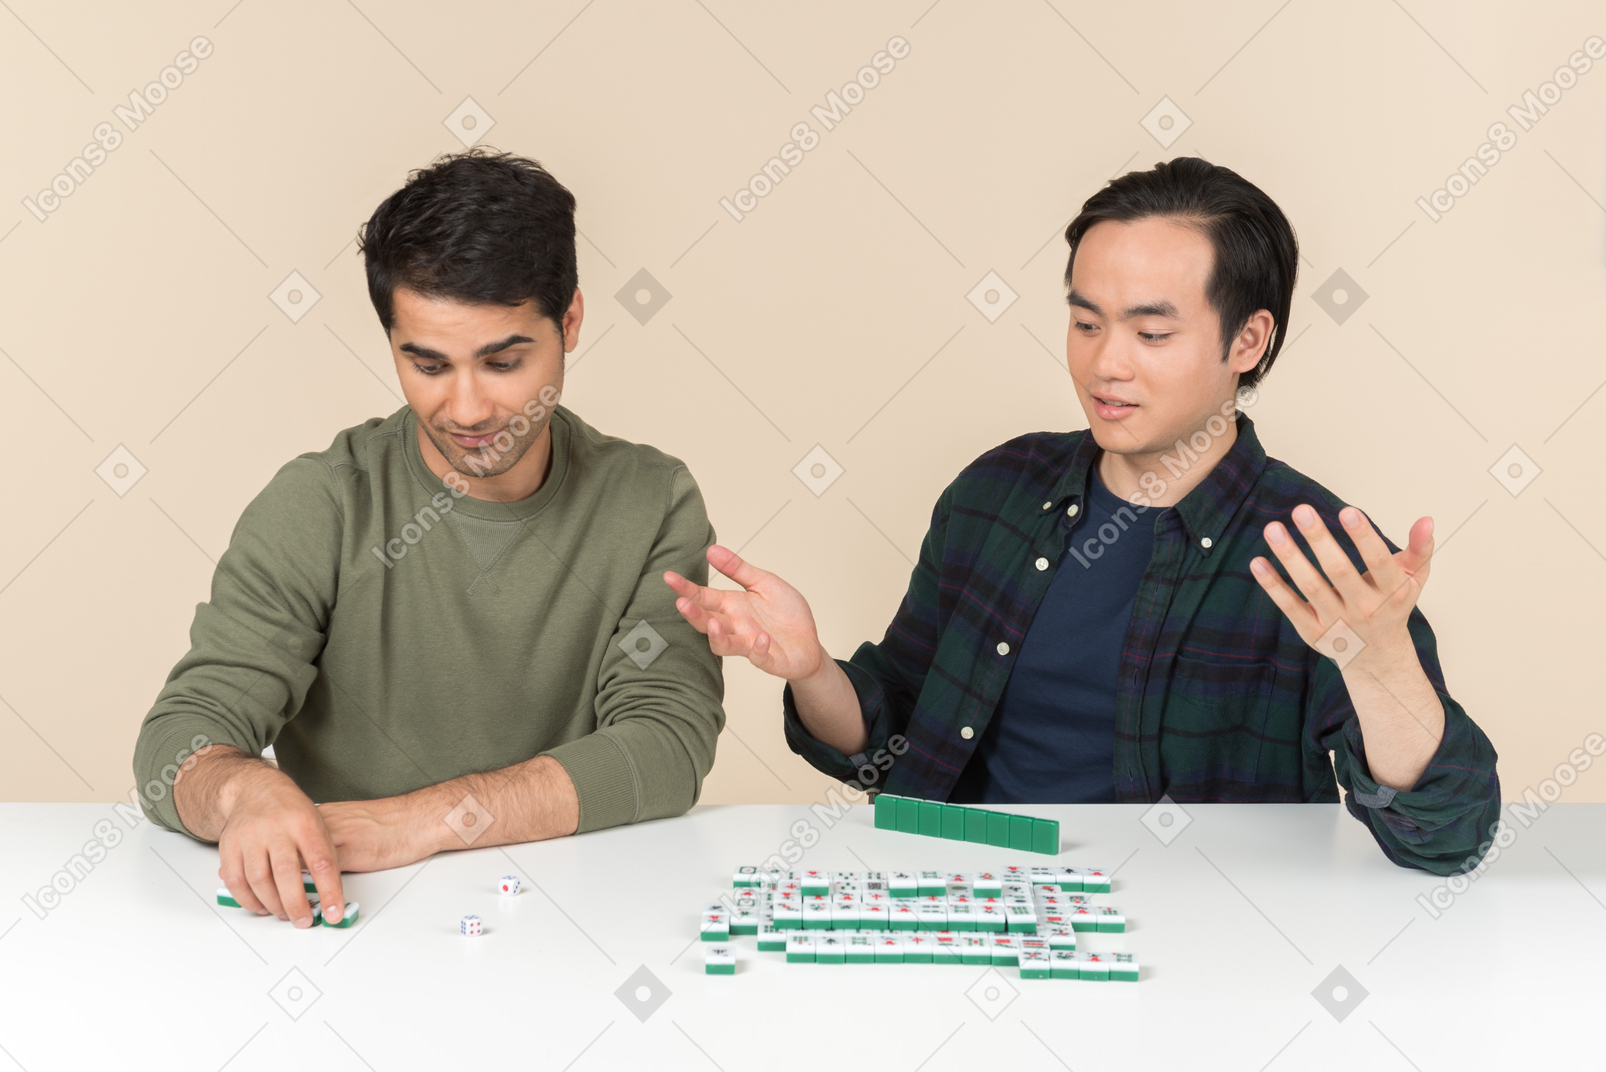 Interracial friends figuring out something while playing board game